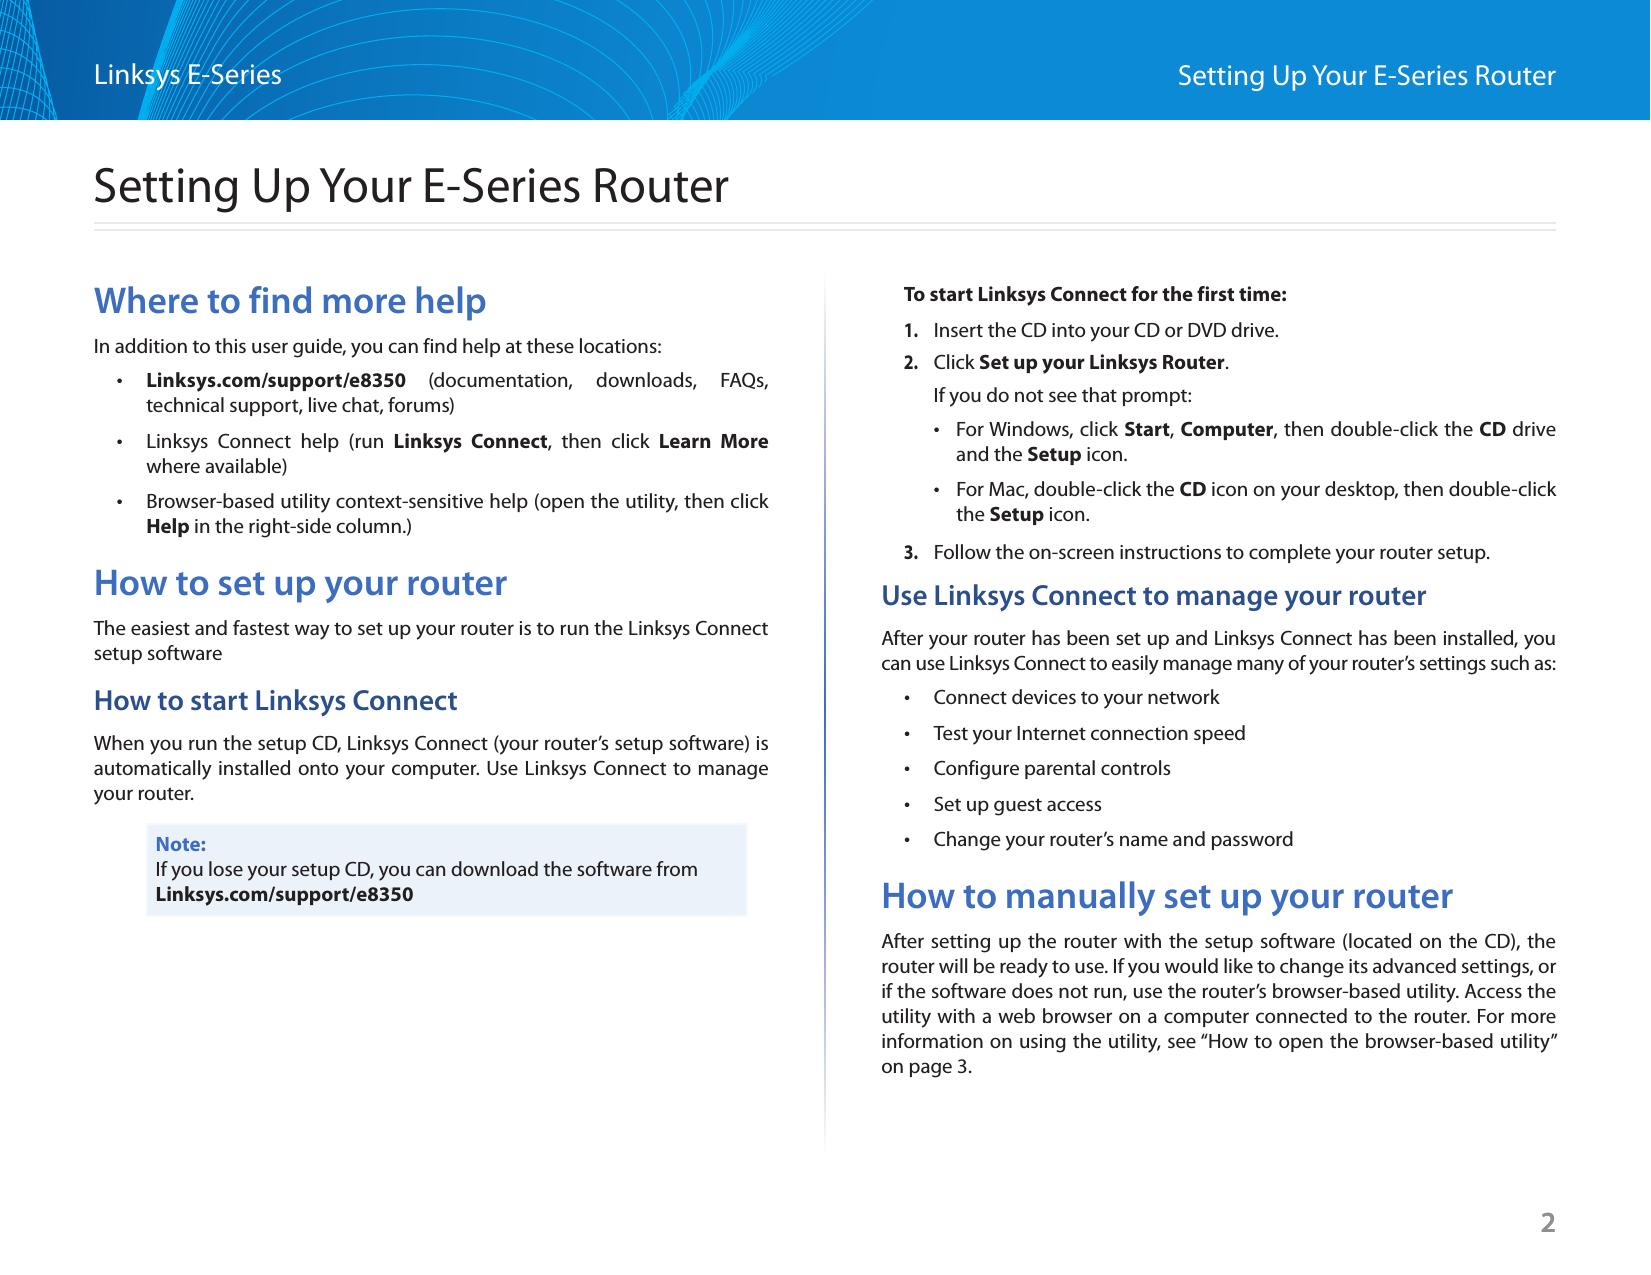 2Setting Up Your E-Series RouterLinksys E-Series2Where to find more helpIn addition to this user guide, you can find help at these locations: •Linksys.com/support/e8350  (documentation, downloads, FAQs,  technical support, live chat, forums) •Linksys Connect help (run Linksys Connect, then click Learn More where available) •Browser-based utility context-sensitive help (open the utility, then click Help in the right-side column.)How to set up your routerThe easiest and fastest way to set up your router is to run the Linksys Connect setup softwareHow to start Linksys ConnectWhen you run the setup CD, Linksys Connect (your router’s setup software) is automatically installed onto your computer. Use Linksys Connect to manage your router.Note:If you lose your setup CD, you can download the software from Linksys.com/support/e8350To start Linksys Connect for the first time: 1. Insert the CD into your CD or DVD drive.2. Click Set up your Linksys Router.If you do not see that prompt: •For Windows, click Start, Computer, then double-click the CD drive and the Setup icon. •For Mac, double-click the CD icon on your desktop, then double-click the Setup icon.3. Follow the on-screen instructions to complete your router setup.Use Linksys Connect to manage your routerAfter your router has been set up and Linksys Connect has been installed, you can use Linksys Connect to easily manage many of your router’s settings such as: •Connect devices to your network •Test your Internet connection speed •Configure parental controls •Set up guest access •Change your router’s name and passwordHow to manually set up your routerAfter setting up the router with the setup software (located on the CD), the router will be ready to use. If you would like to change its advanced settings, or if the software does not run, use the router’s browser-based utility. Access the utility with a web browser on a computer connected to the router. For more information on using the utility, see “How to open the browser-based utility” on page 3.Setting Up Your E-Series Router